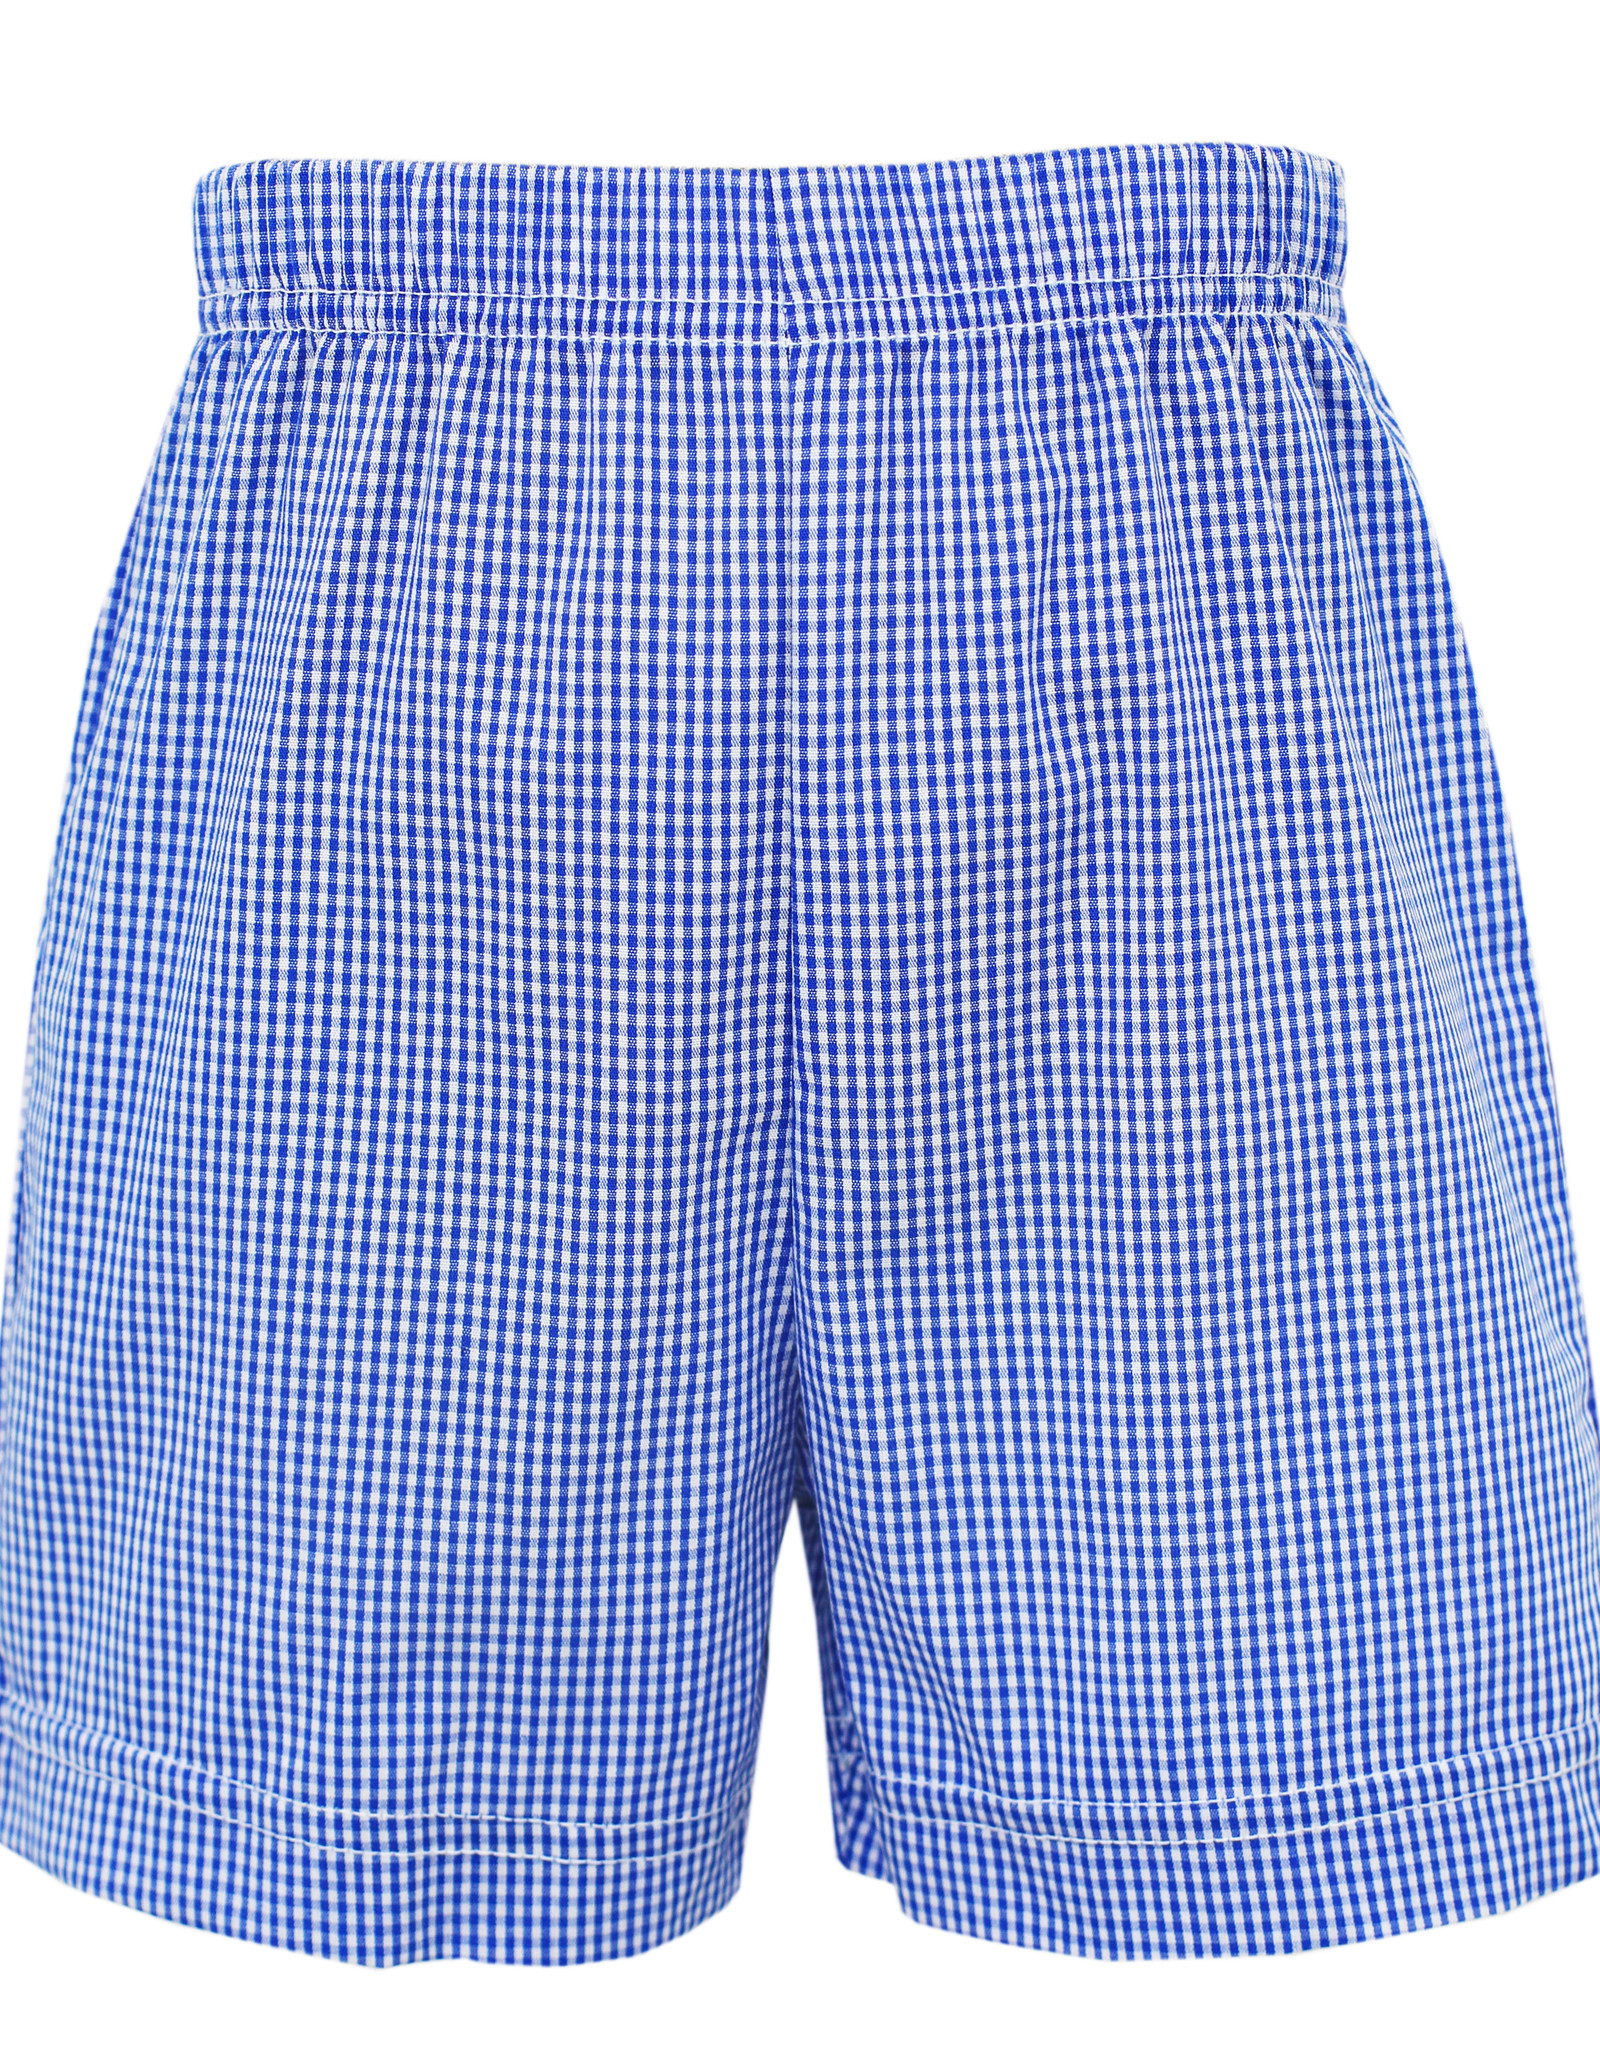 Claire and Charlie Royal Blue Gingham Shorts